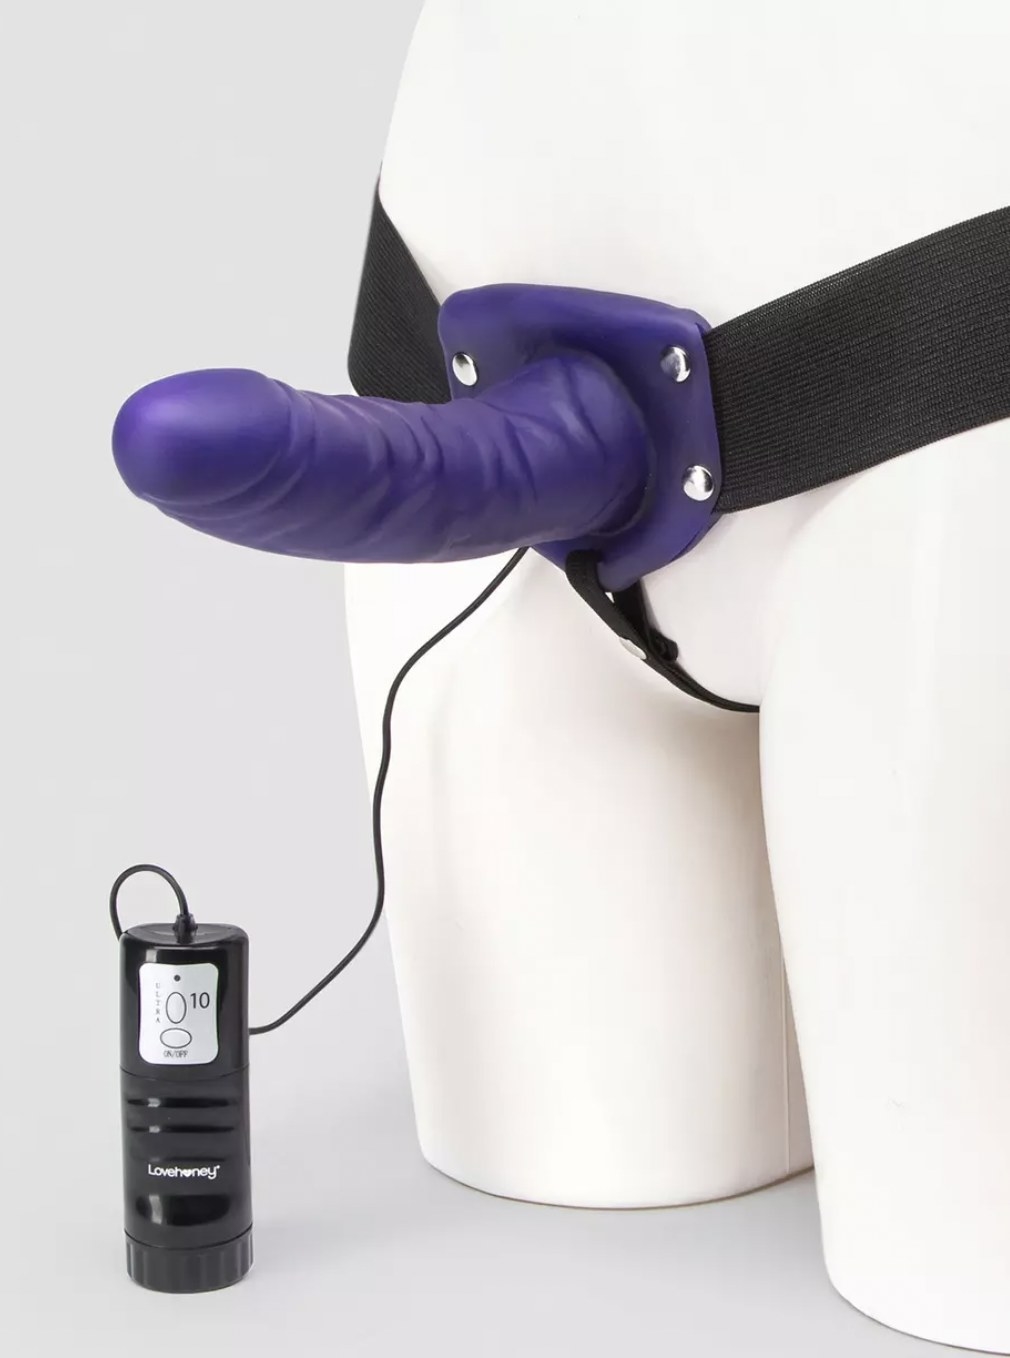 mannequin with purple strap-on secured and attached to vibration control device